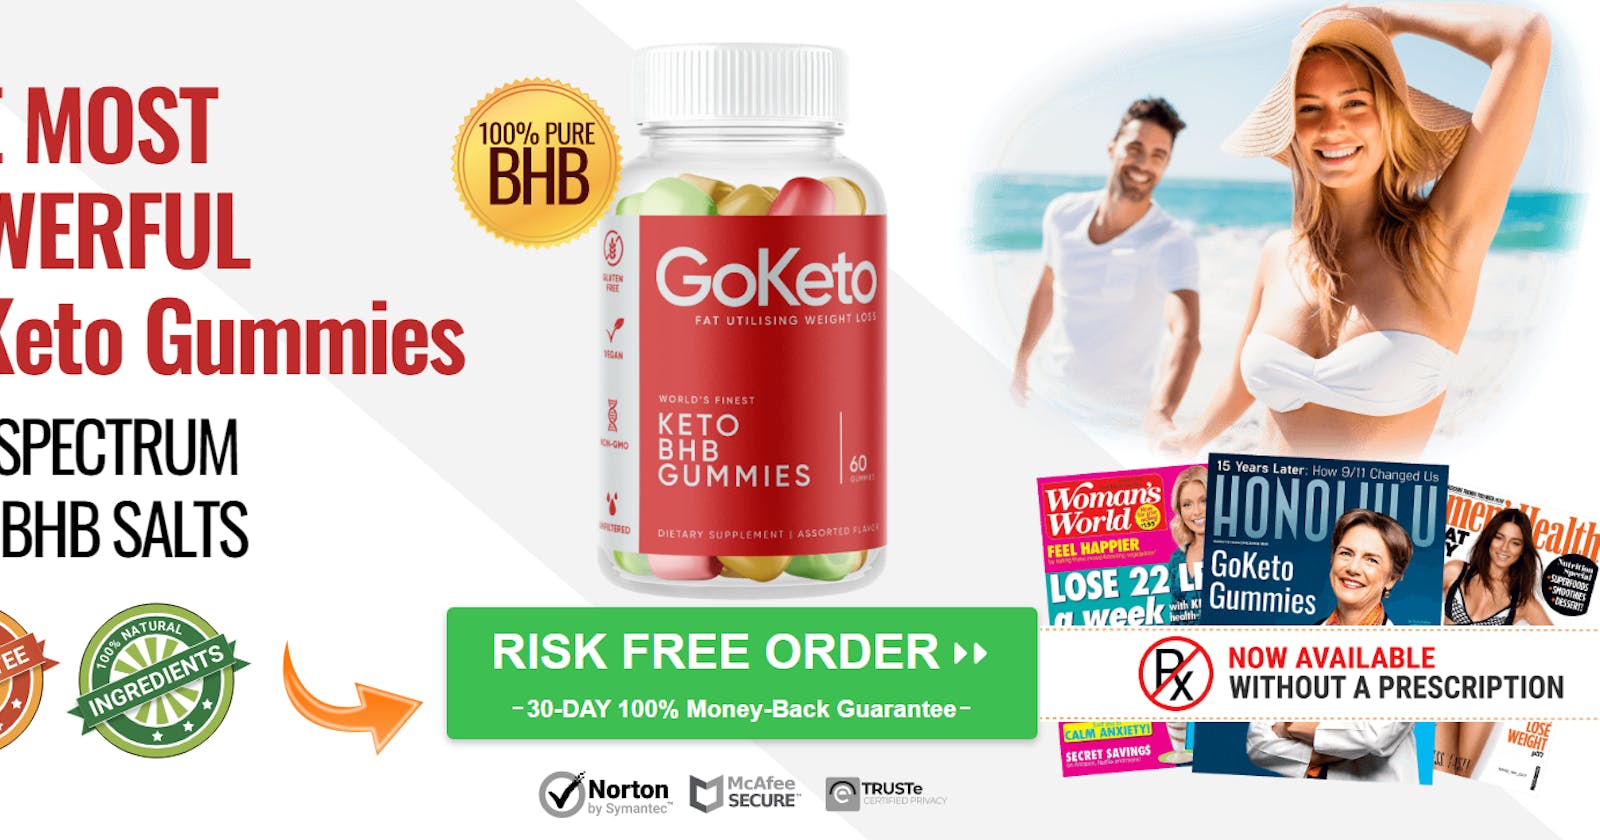 The Revolutionary Weight Loss Solution: Jeremy Renner Keto Gummies!